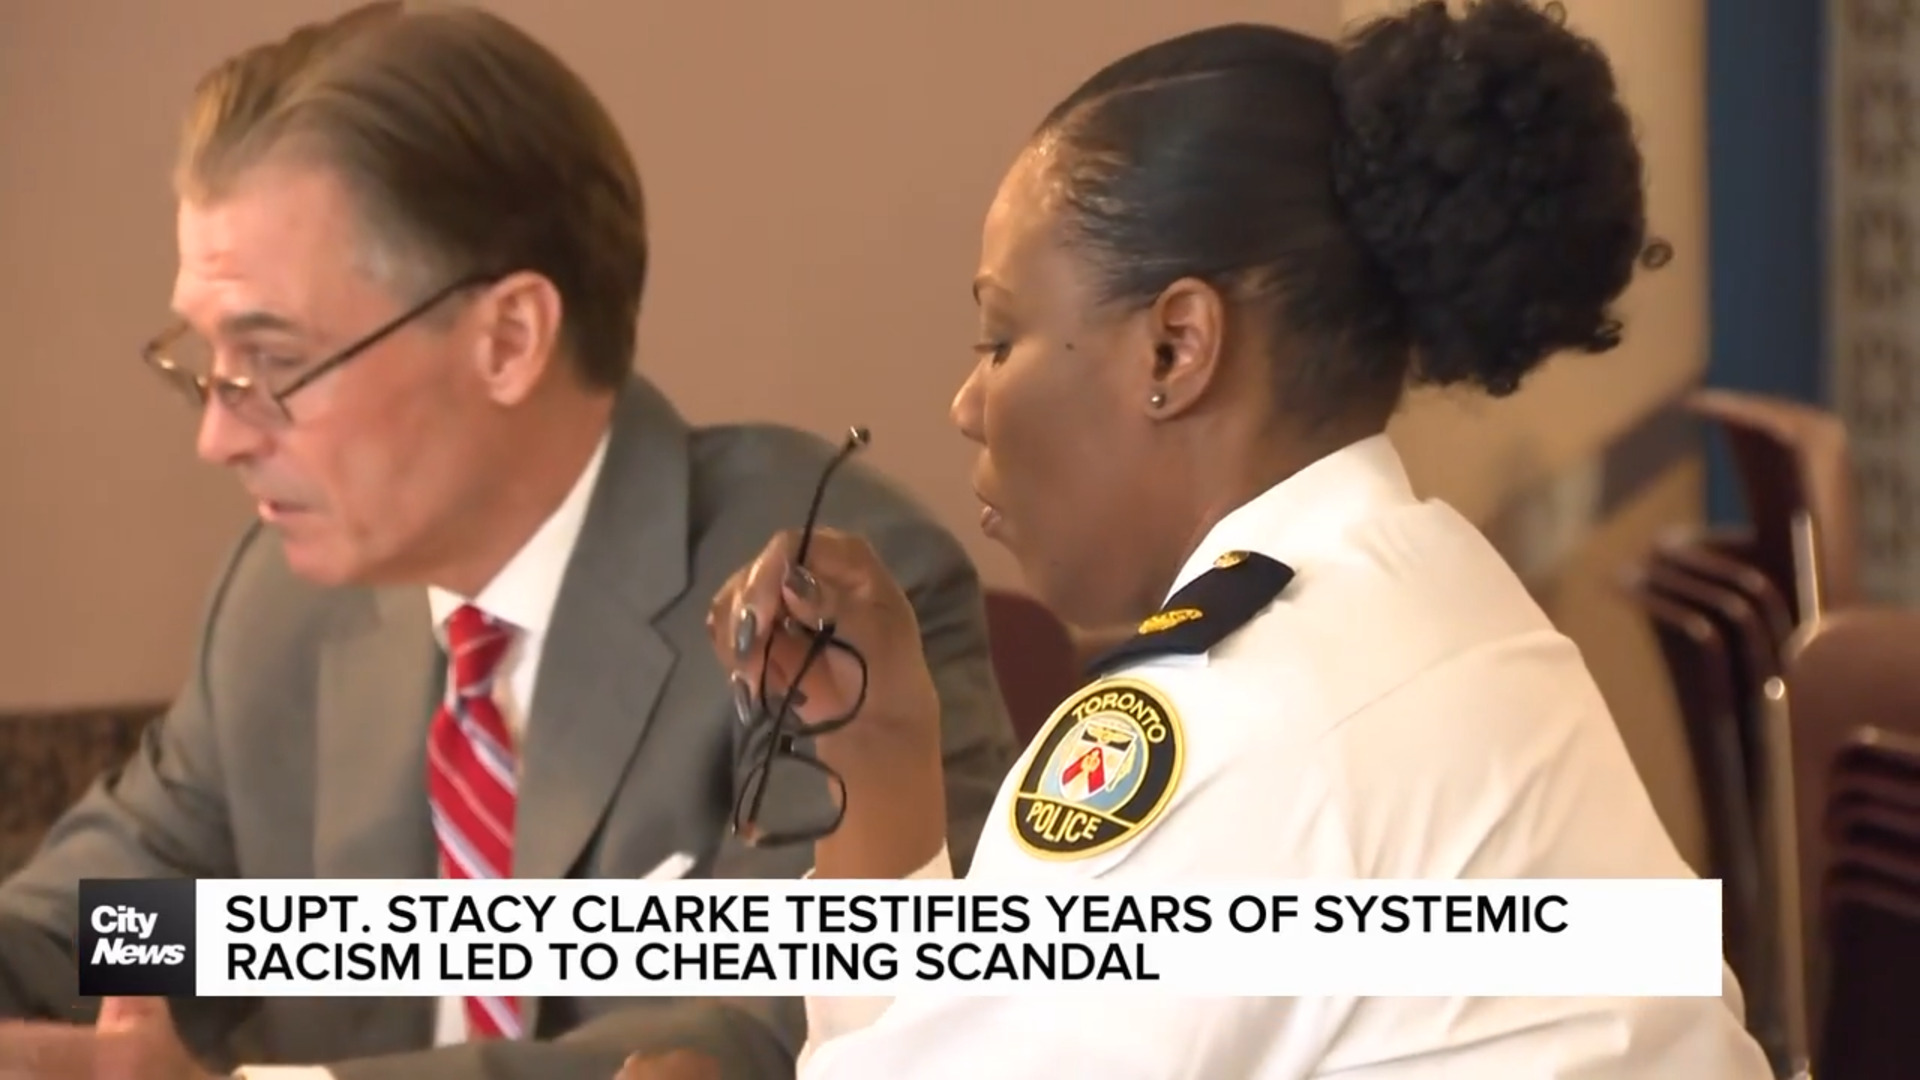 Supt. Stacy Clarke testifies years of systemic racism led to cheating scandal